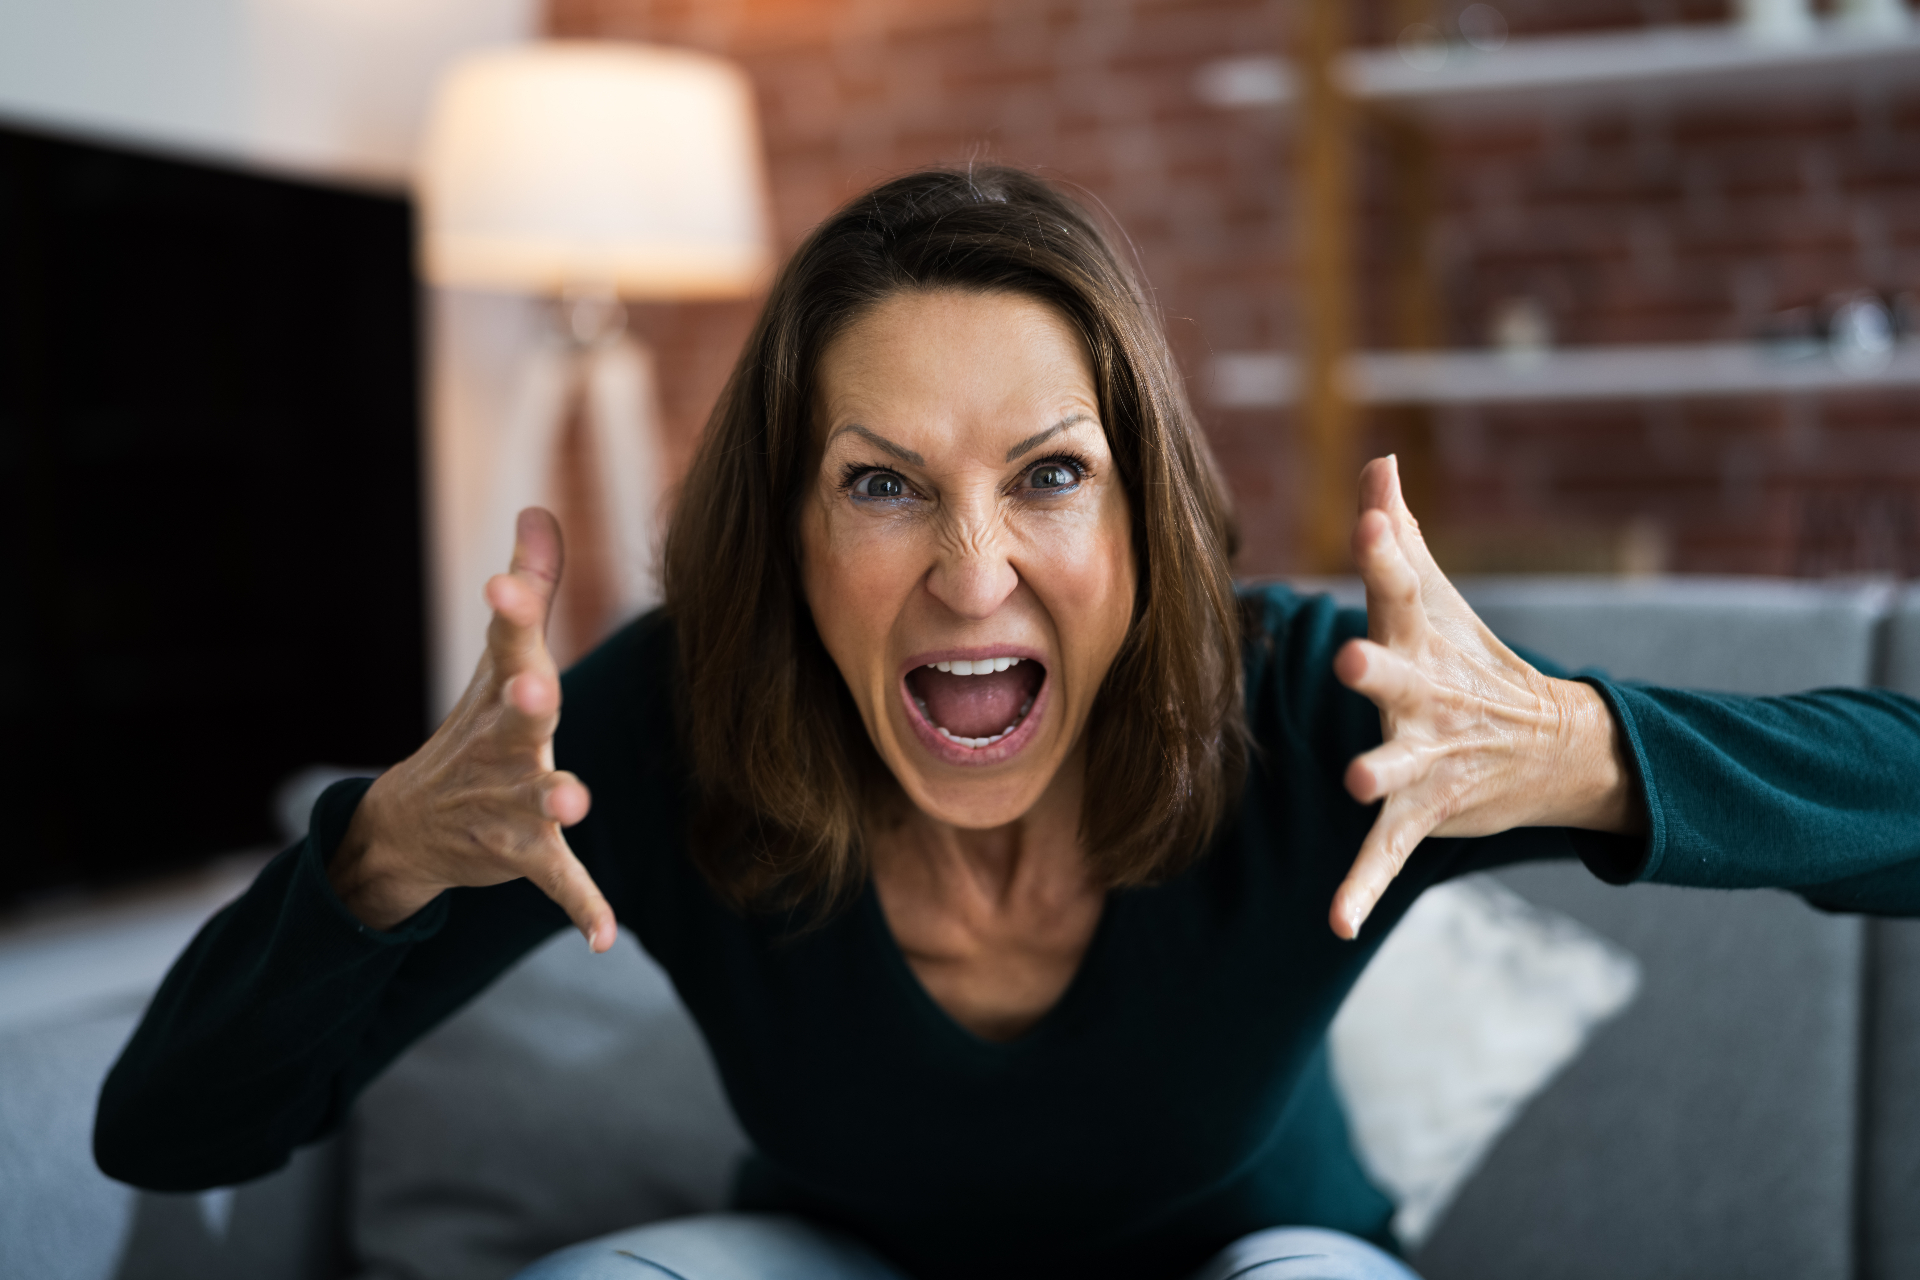 Woman angry, shouting. Is it difficult for you to contain your anger? Would you like to know how to cope better? Delray, FL counselors can help! Read more here. 